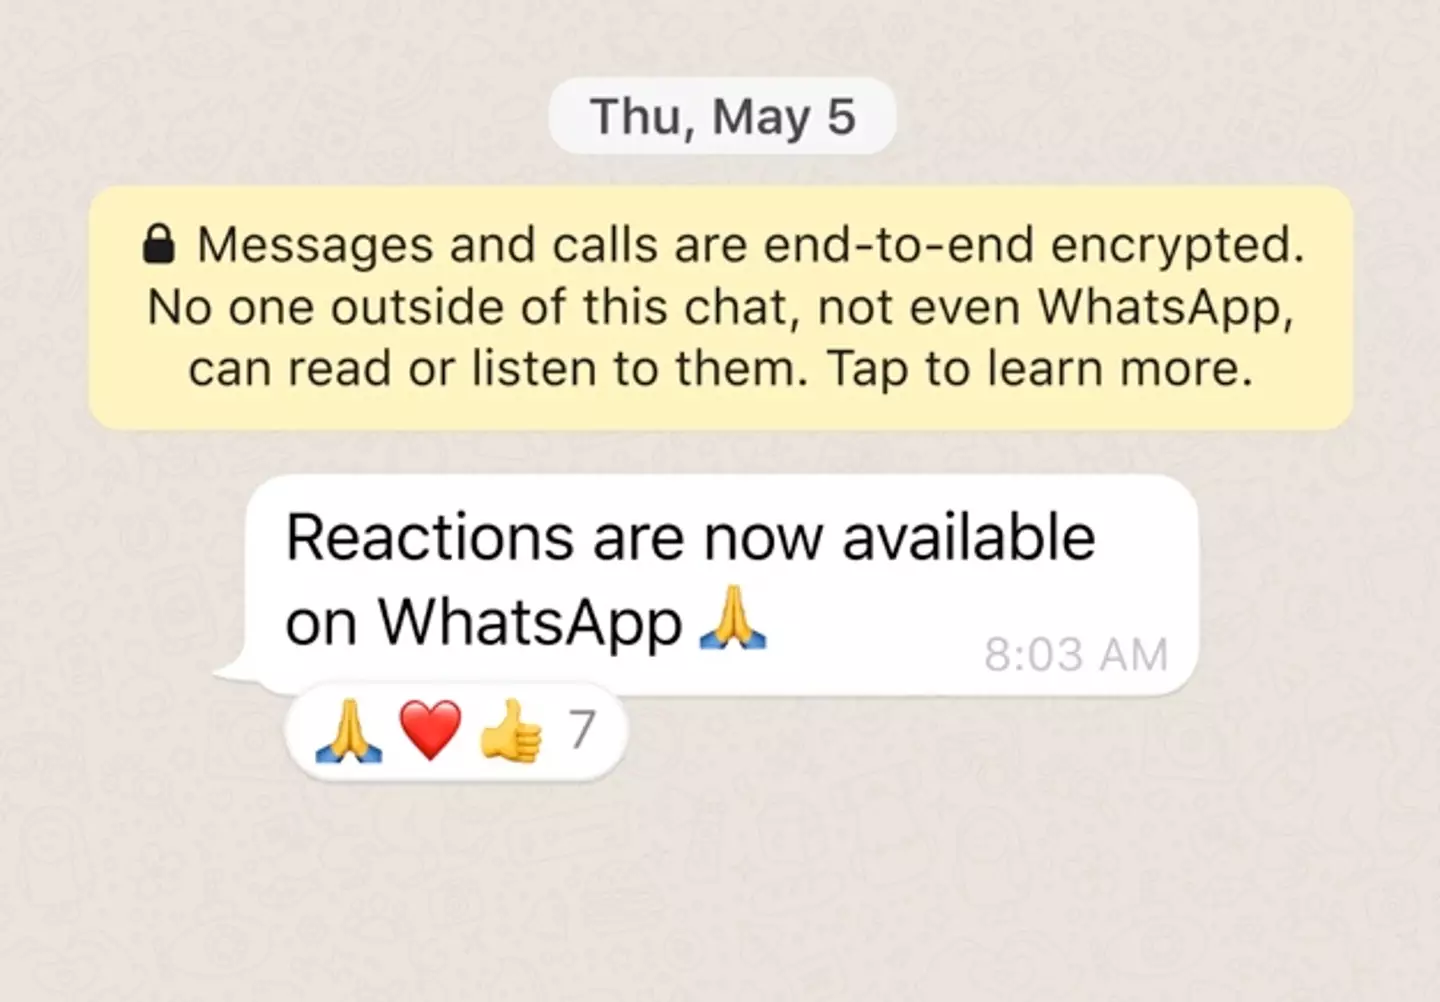 You can now react to messages on WhatsApp.